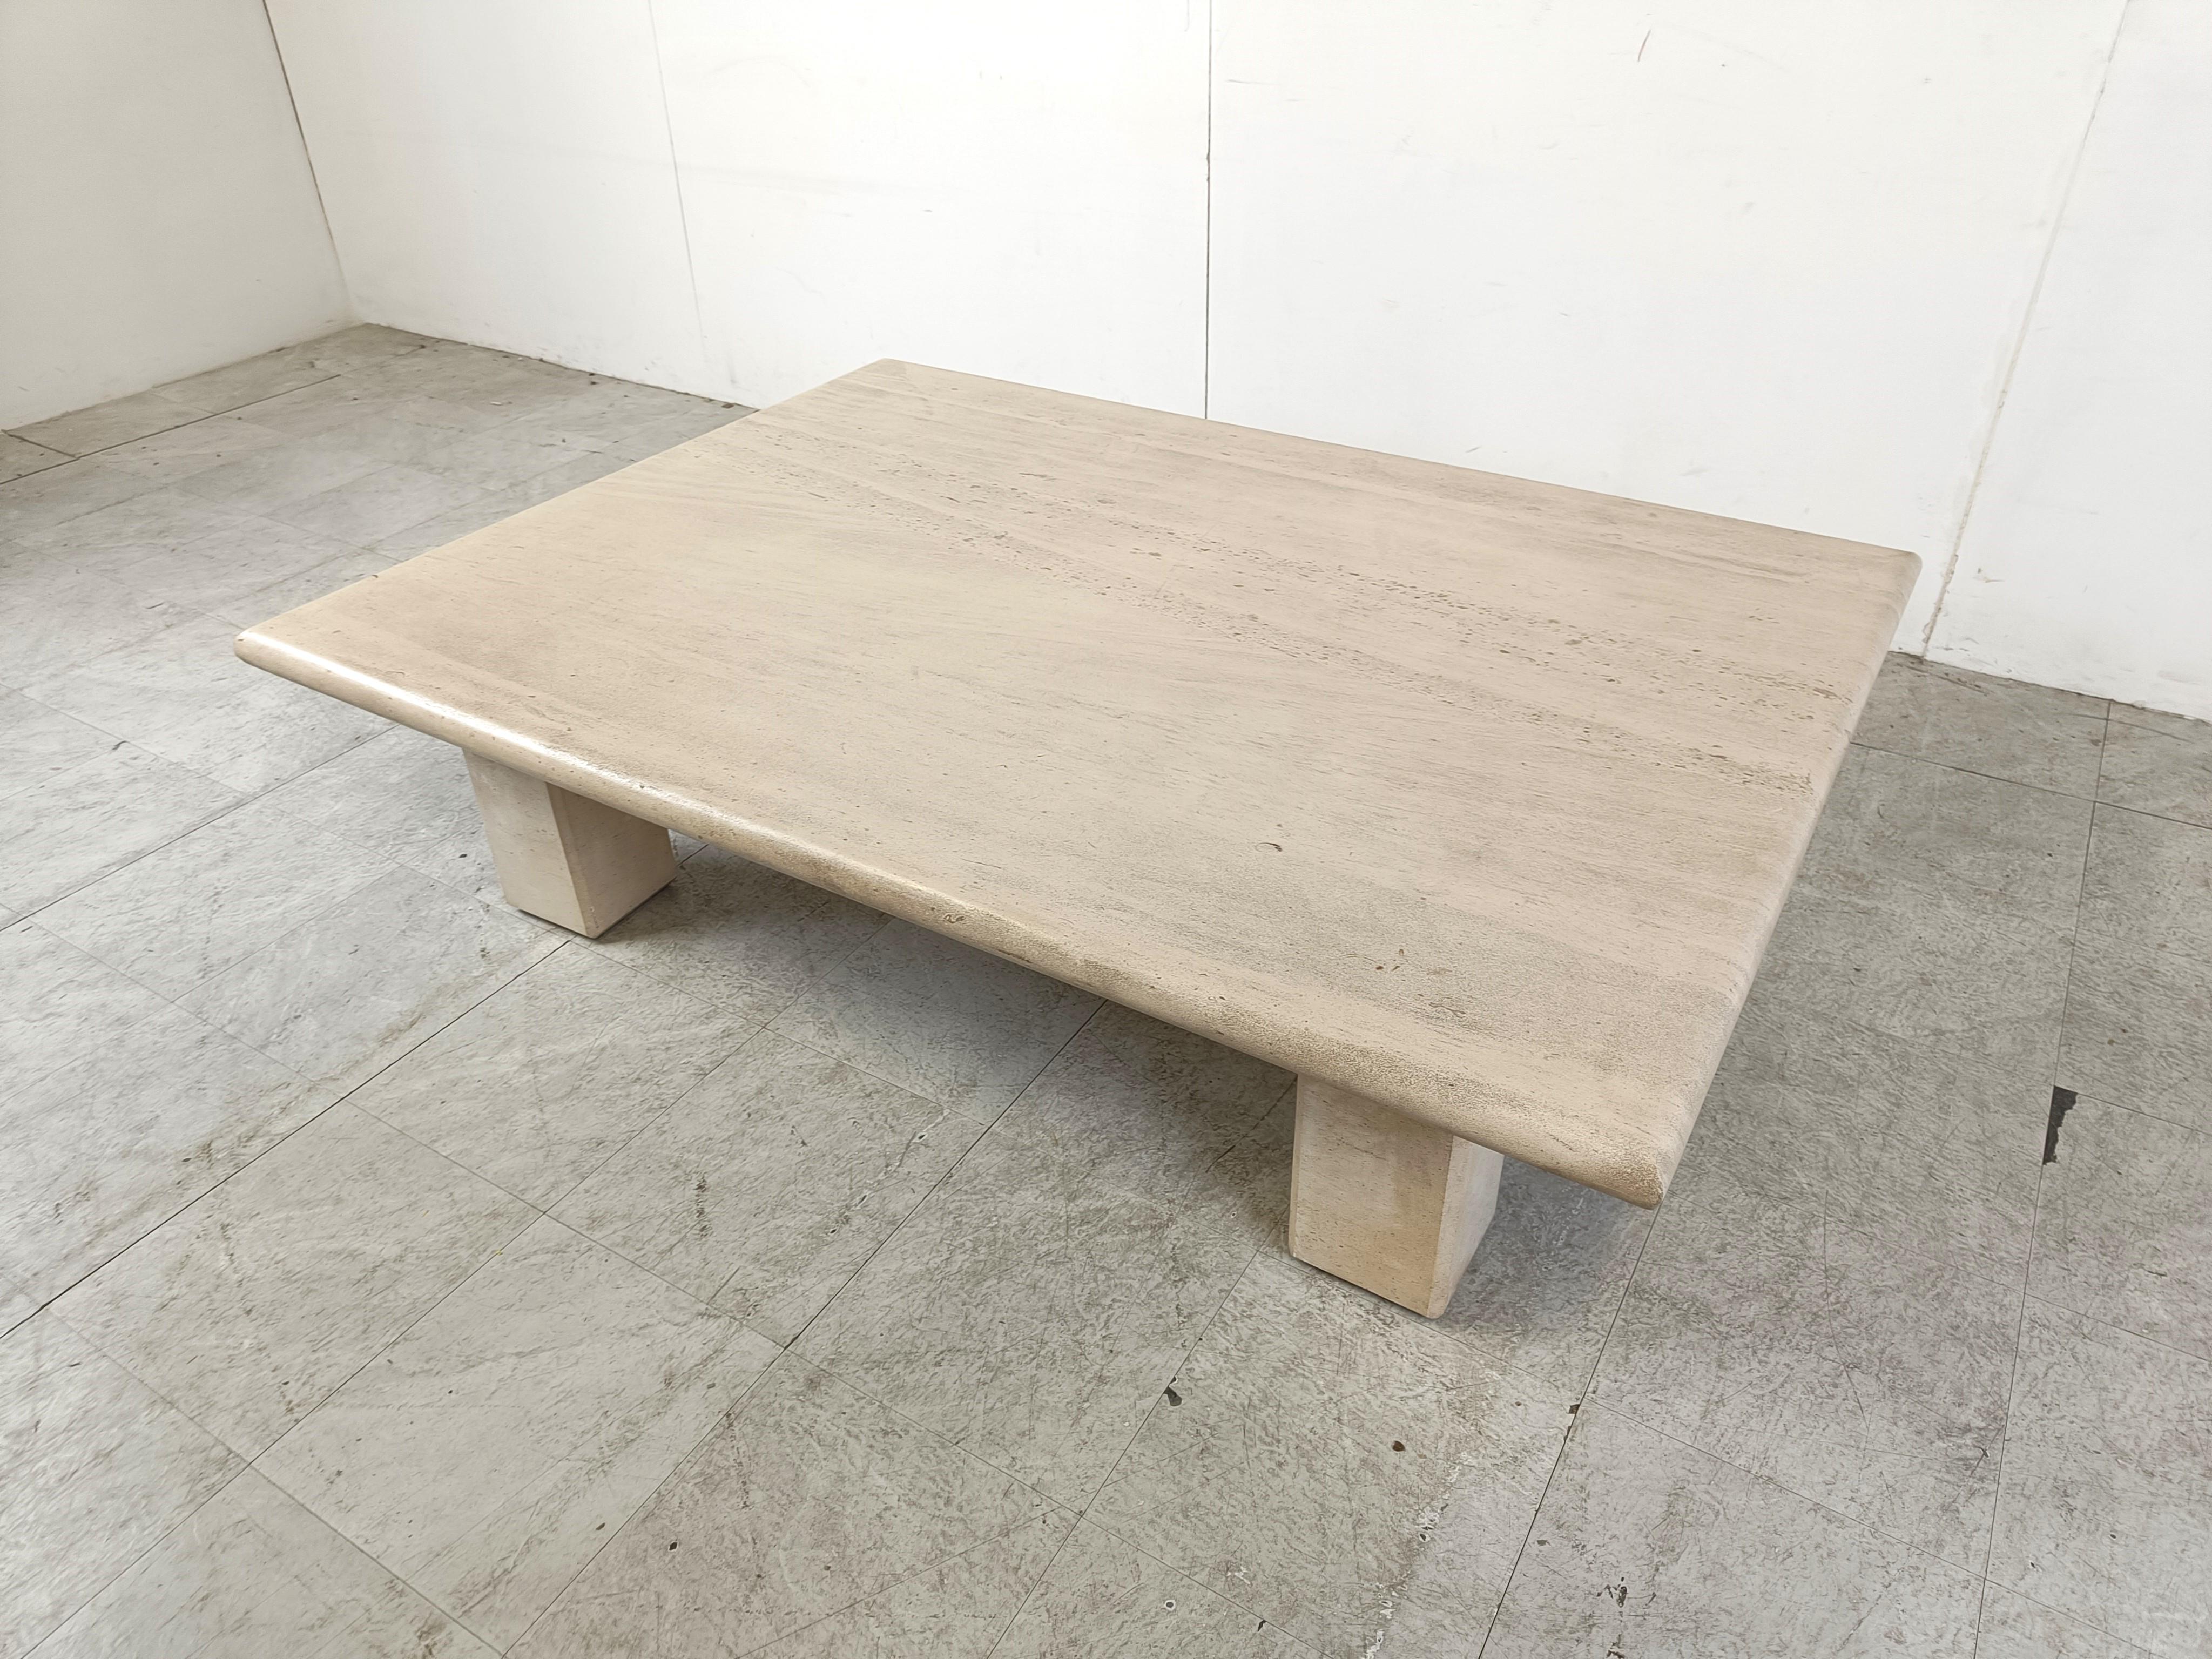 Vintage large rectangular travertine coffee table with four legs.

Beautiful natural travertine stone.

The table top is very very thick and incredibly heavy, but a real statement piece.

Good condition

1970s - Italy

Height: 40cm/15.74